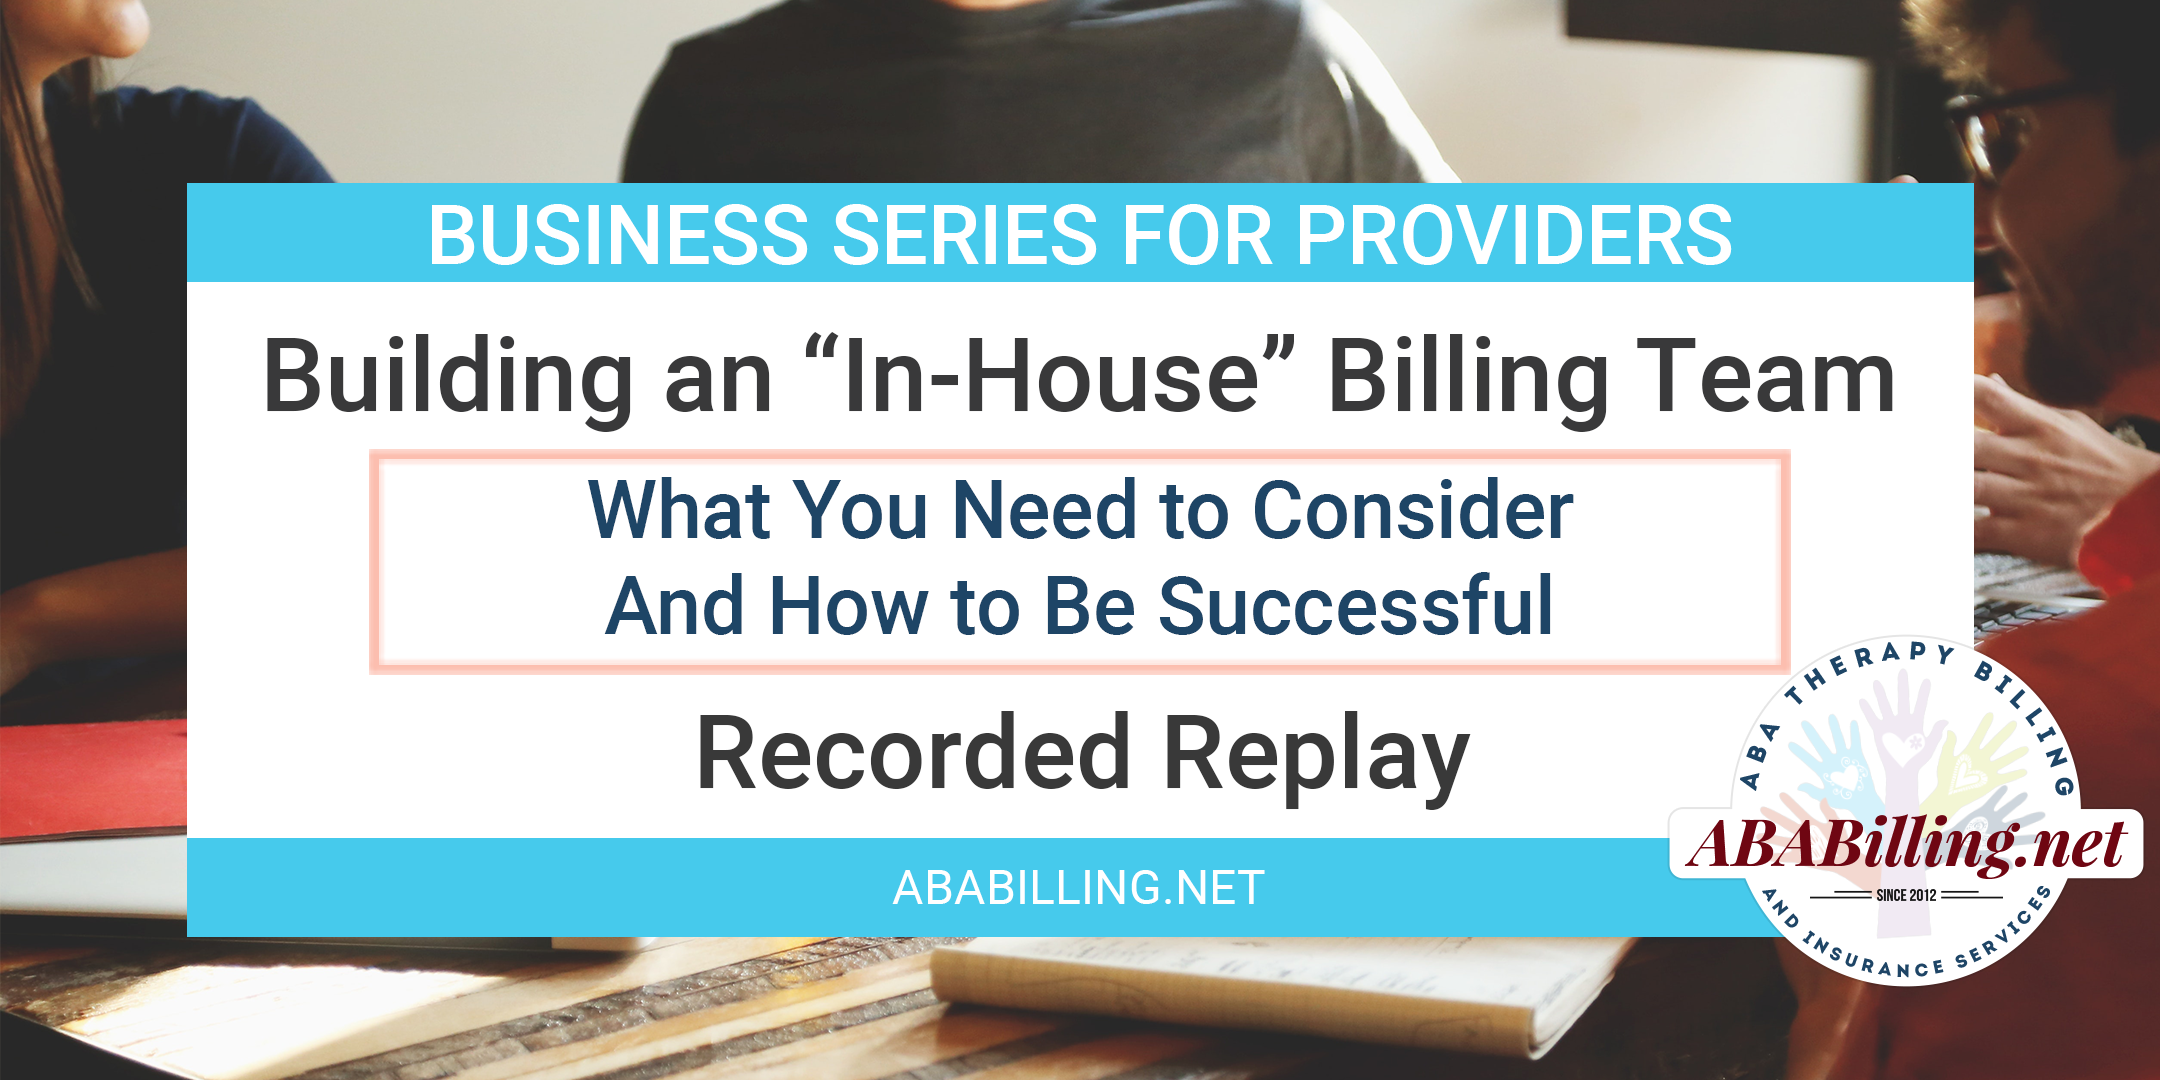 Webinar: How to Build a Successful “In-House” Billing Team